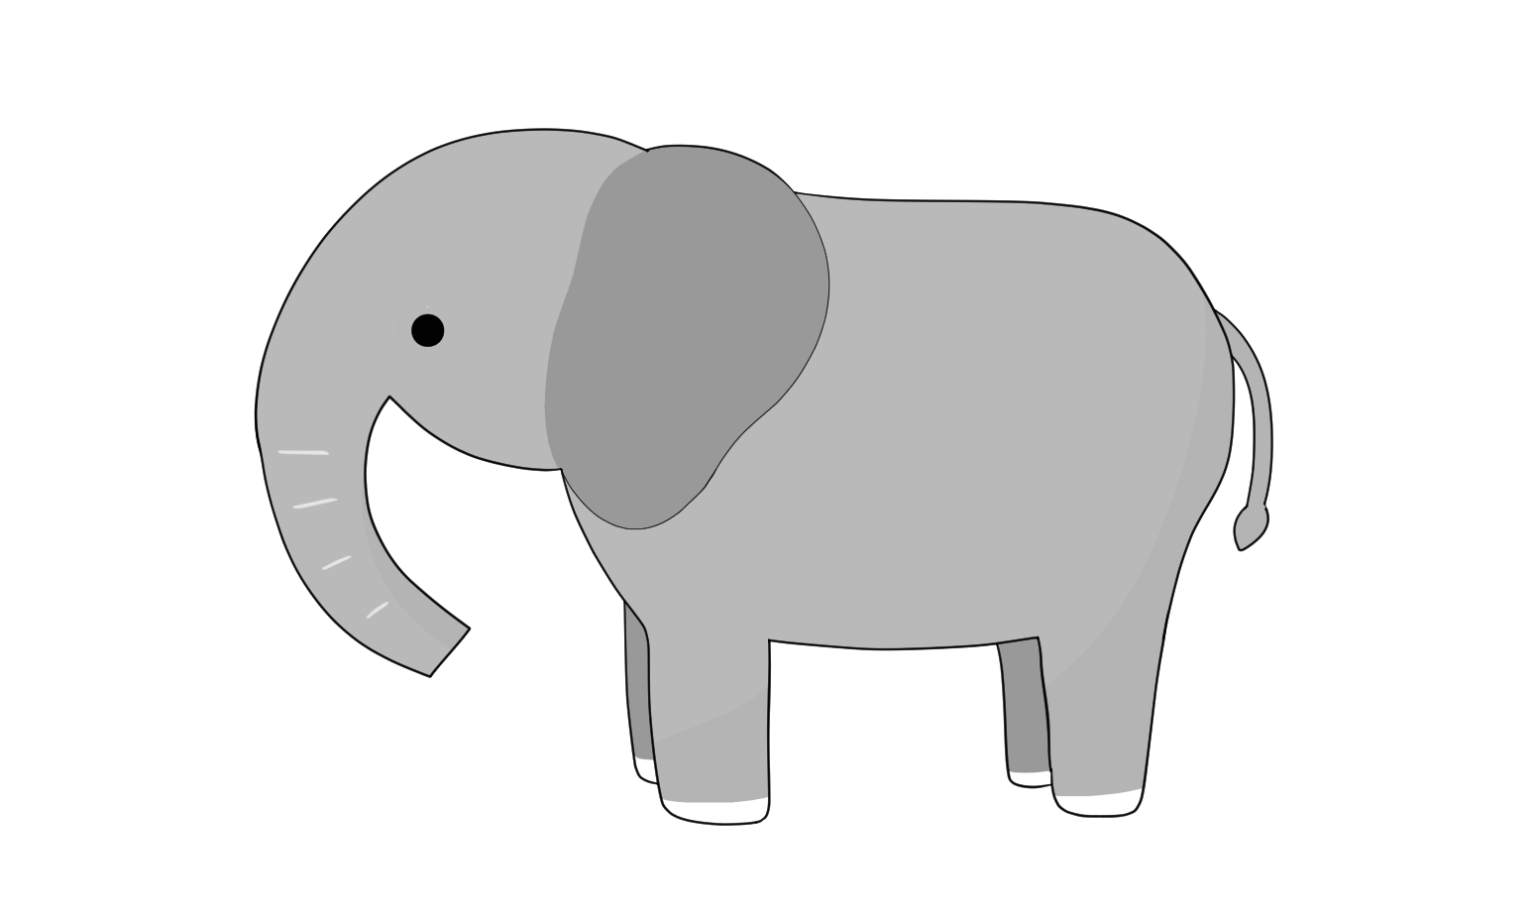 Elephant seen from the side